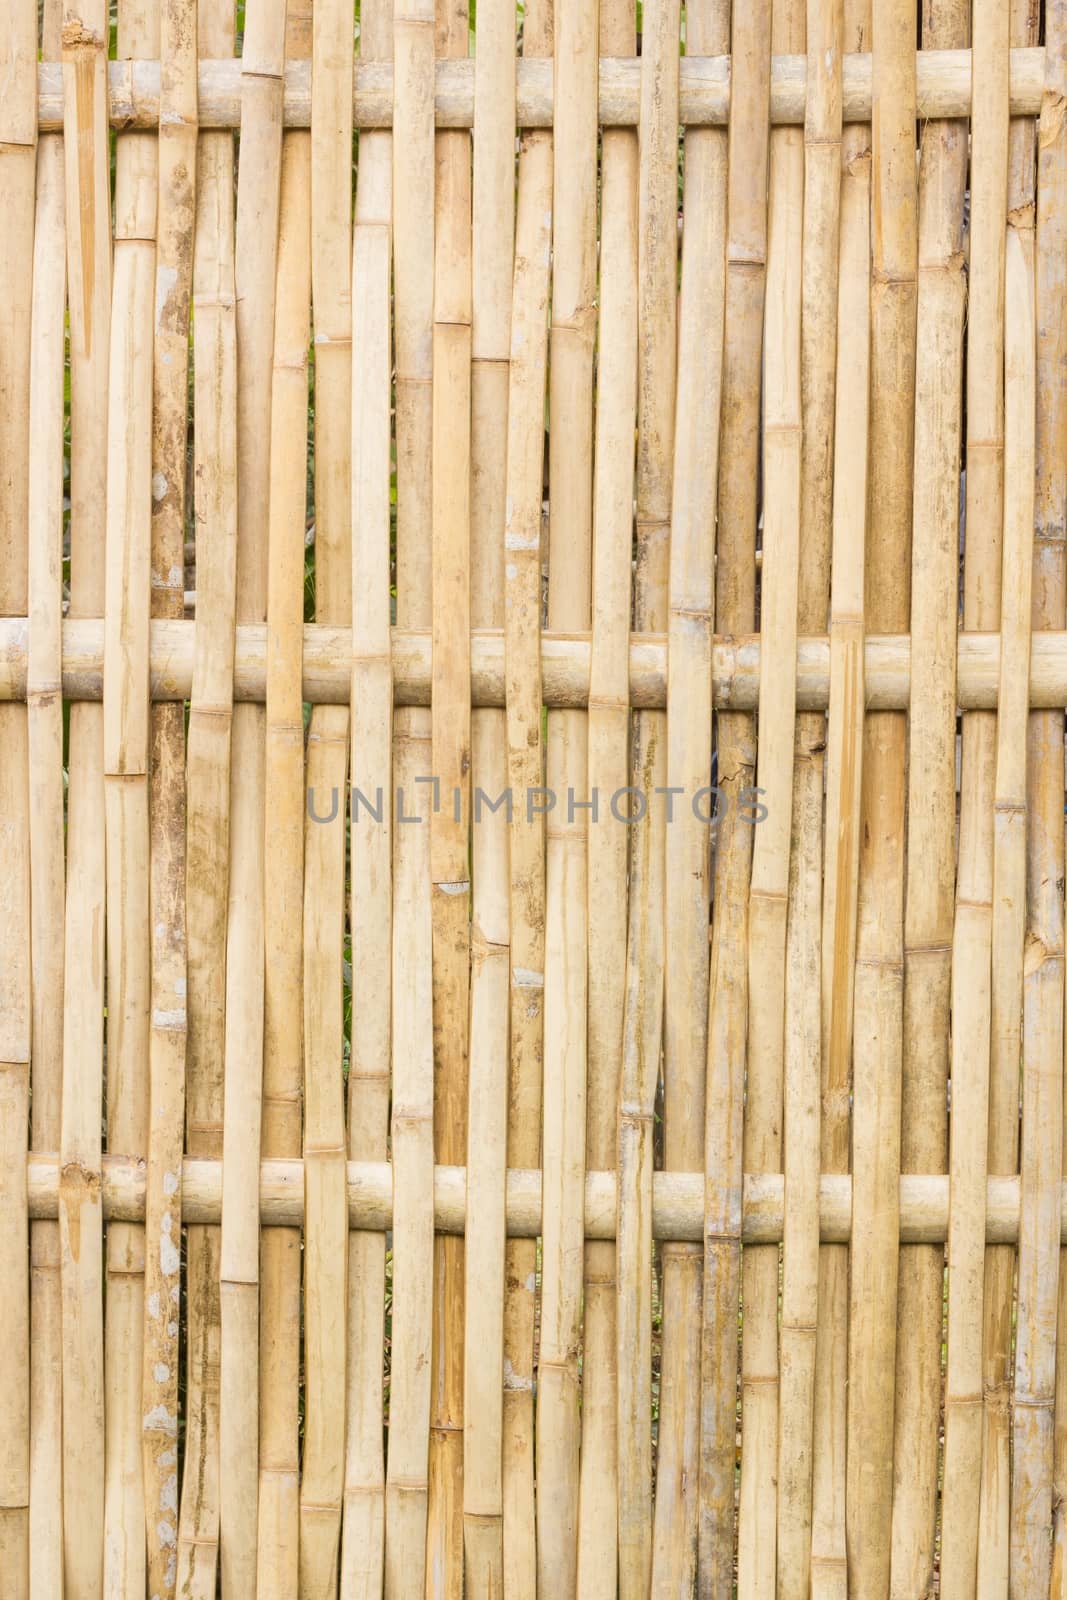 Bamboo fences by a3701027